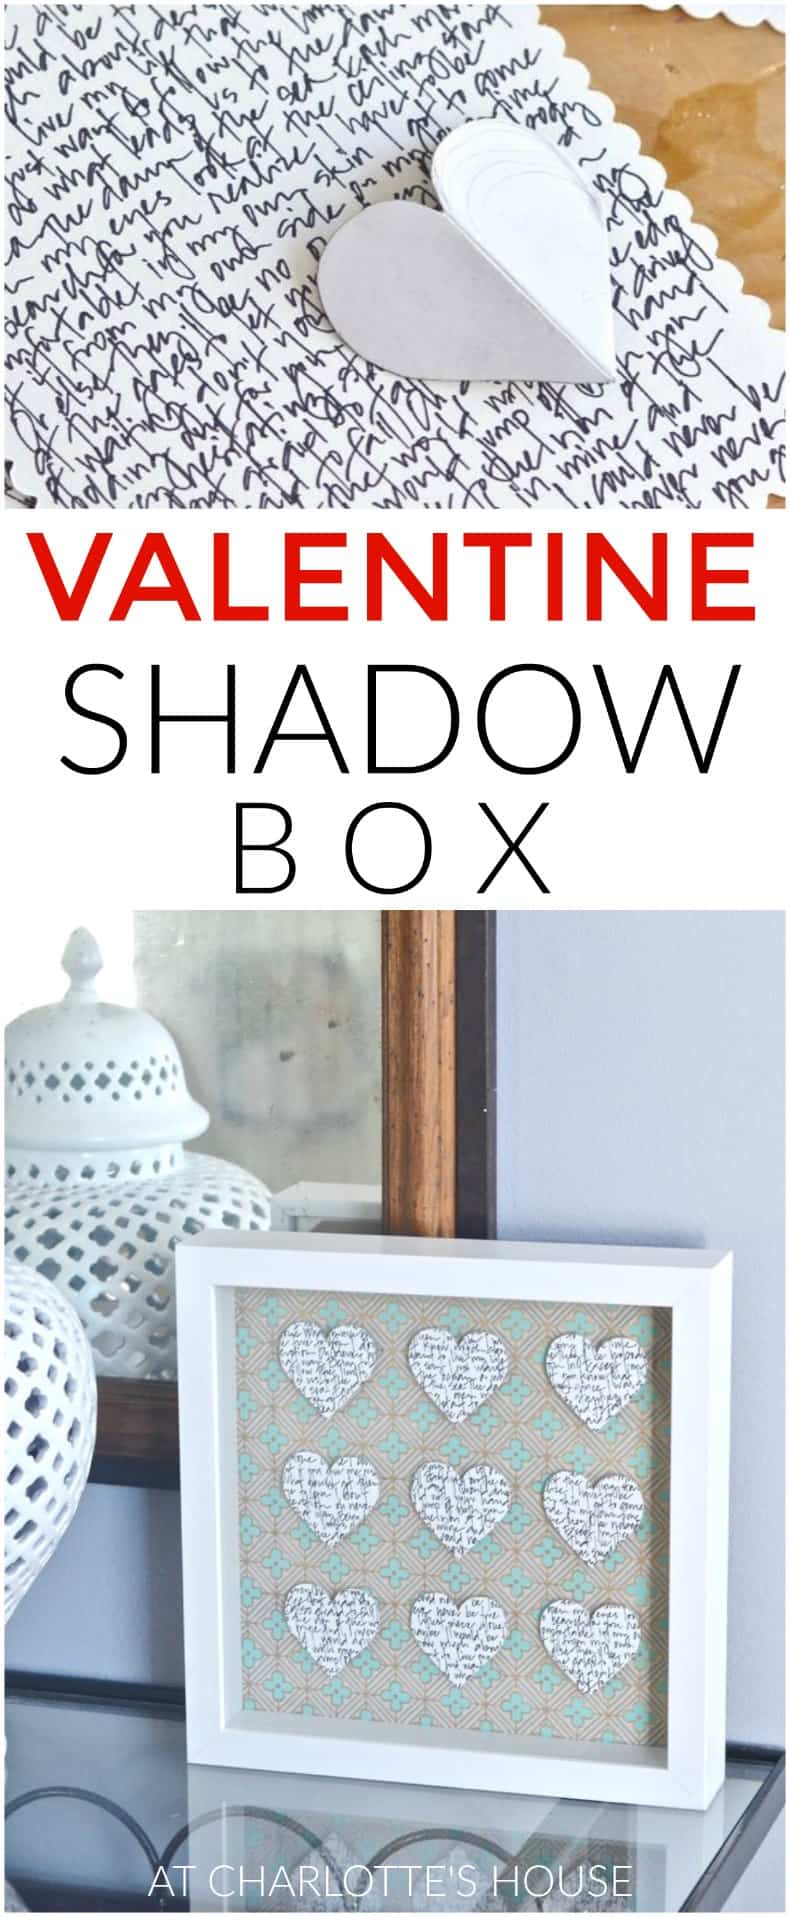 Valentine's Day Shadow box with floating quote hearts.